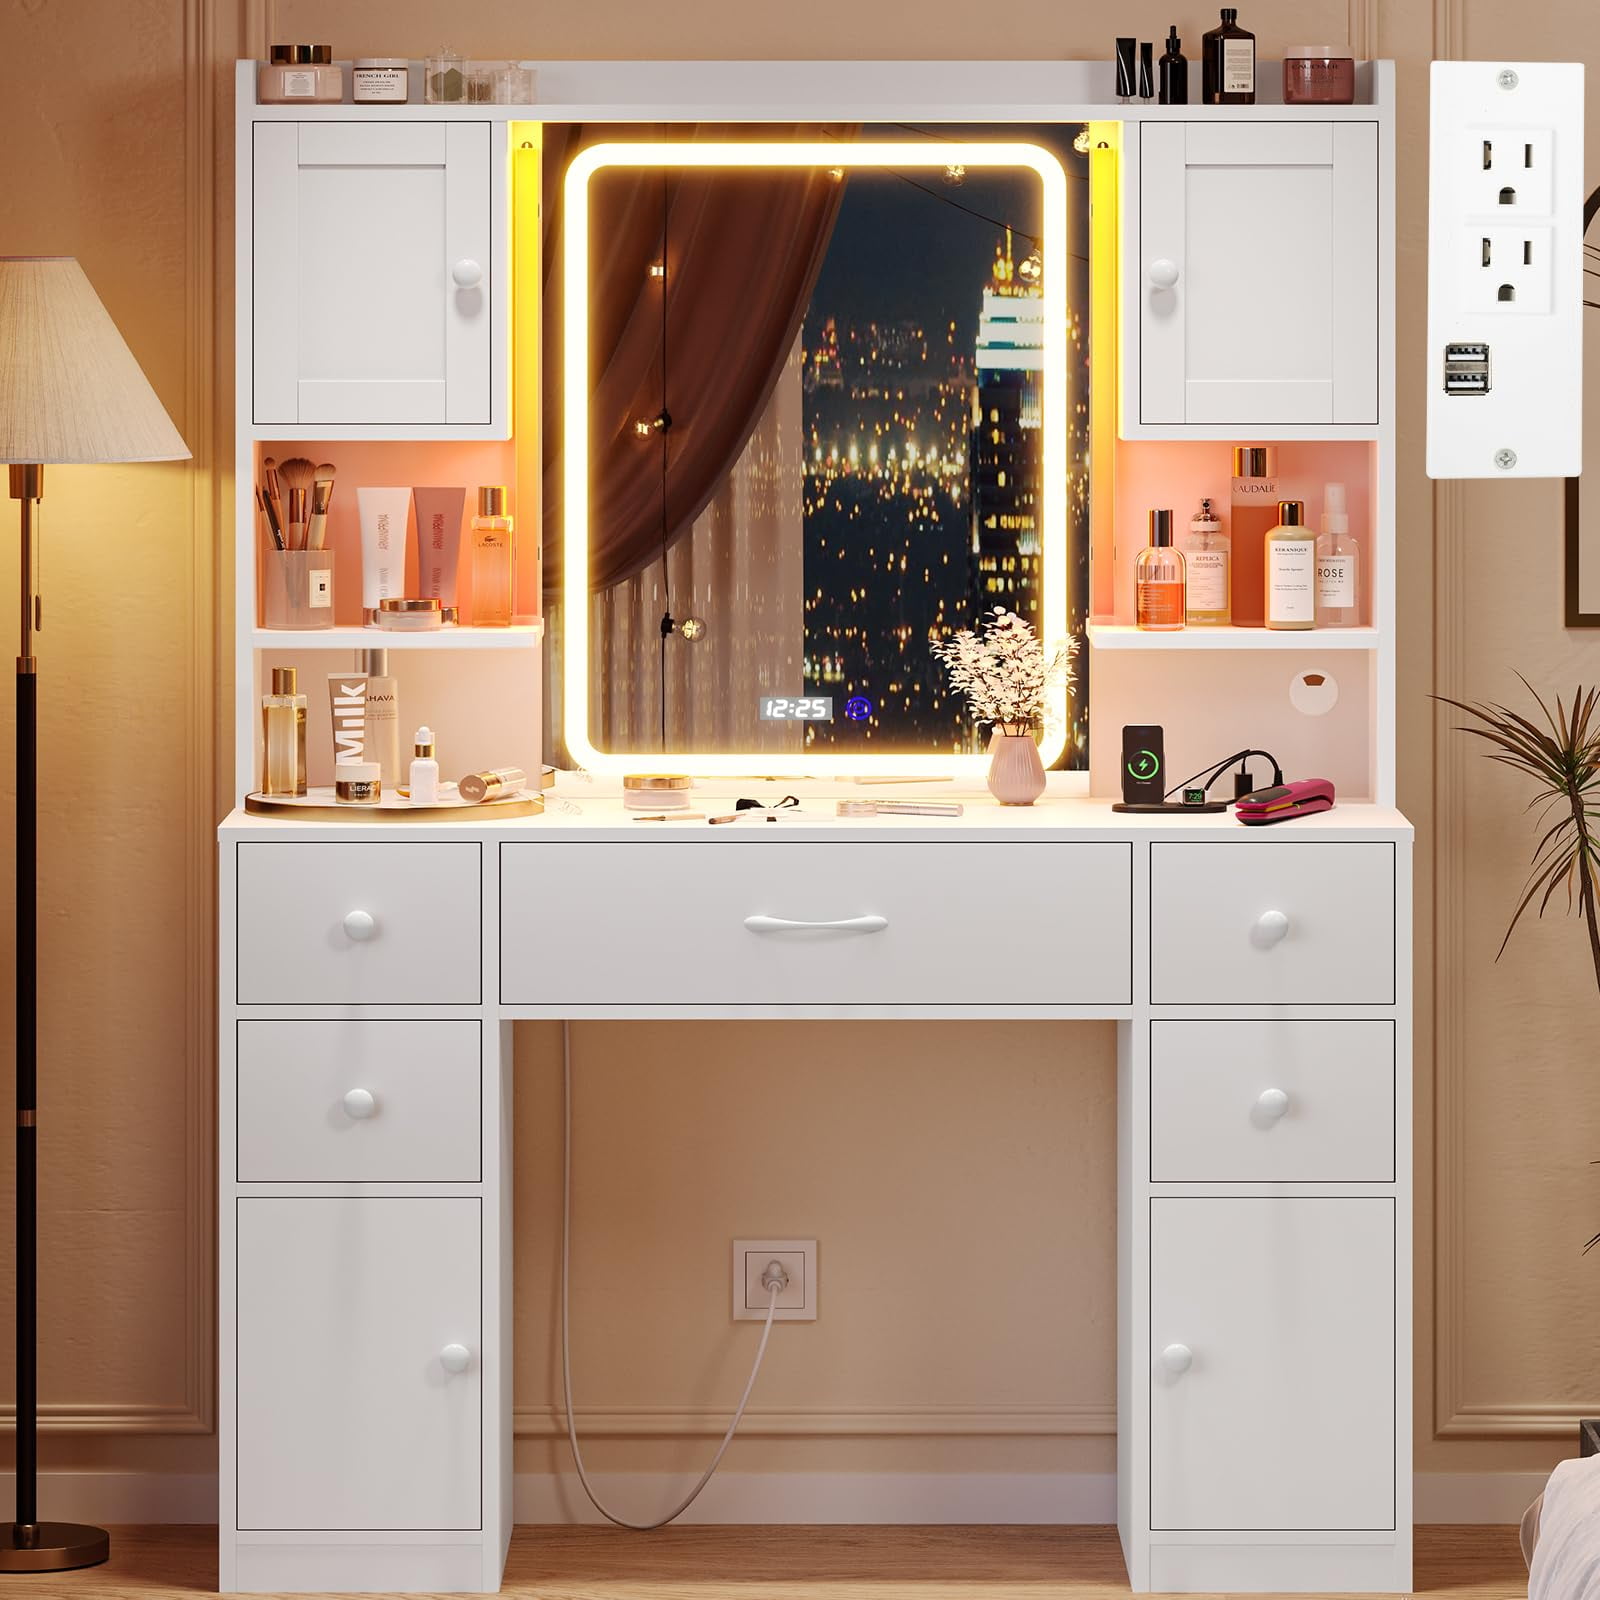 Boahaus Alana 5 White Drawers, Crystal Knobs, and Vanity Ball Mirror Black Lights, Desk with